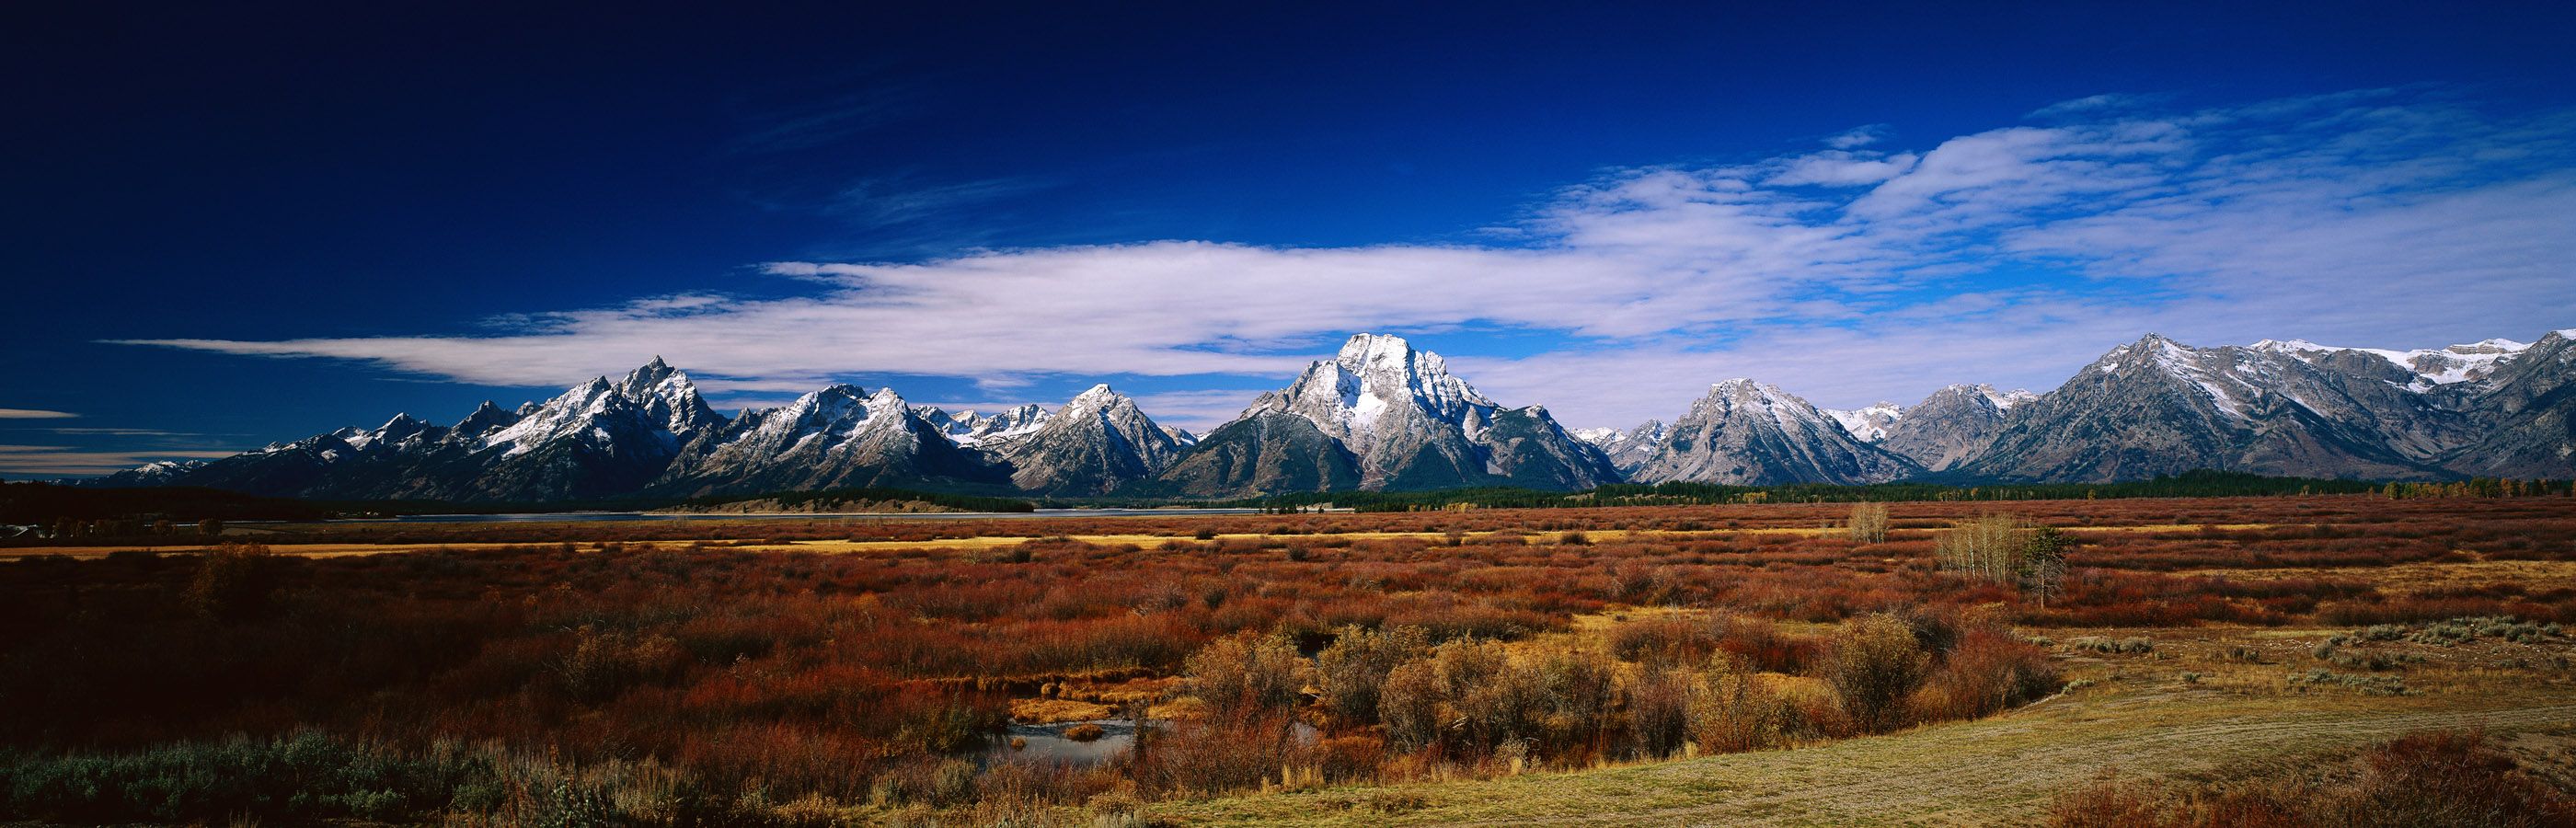 Outstanding Rocky Mountain wallpaper Landscapes wallpapers